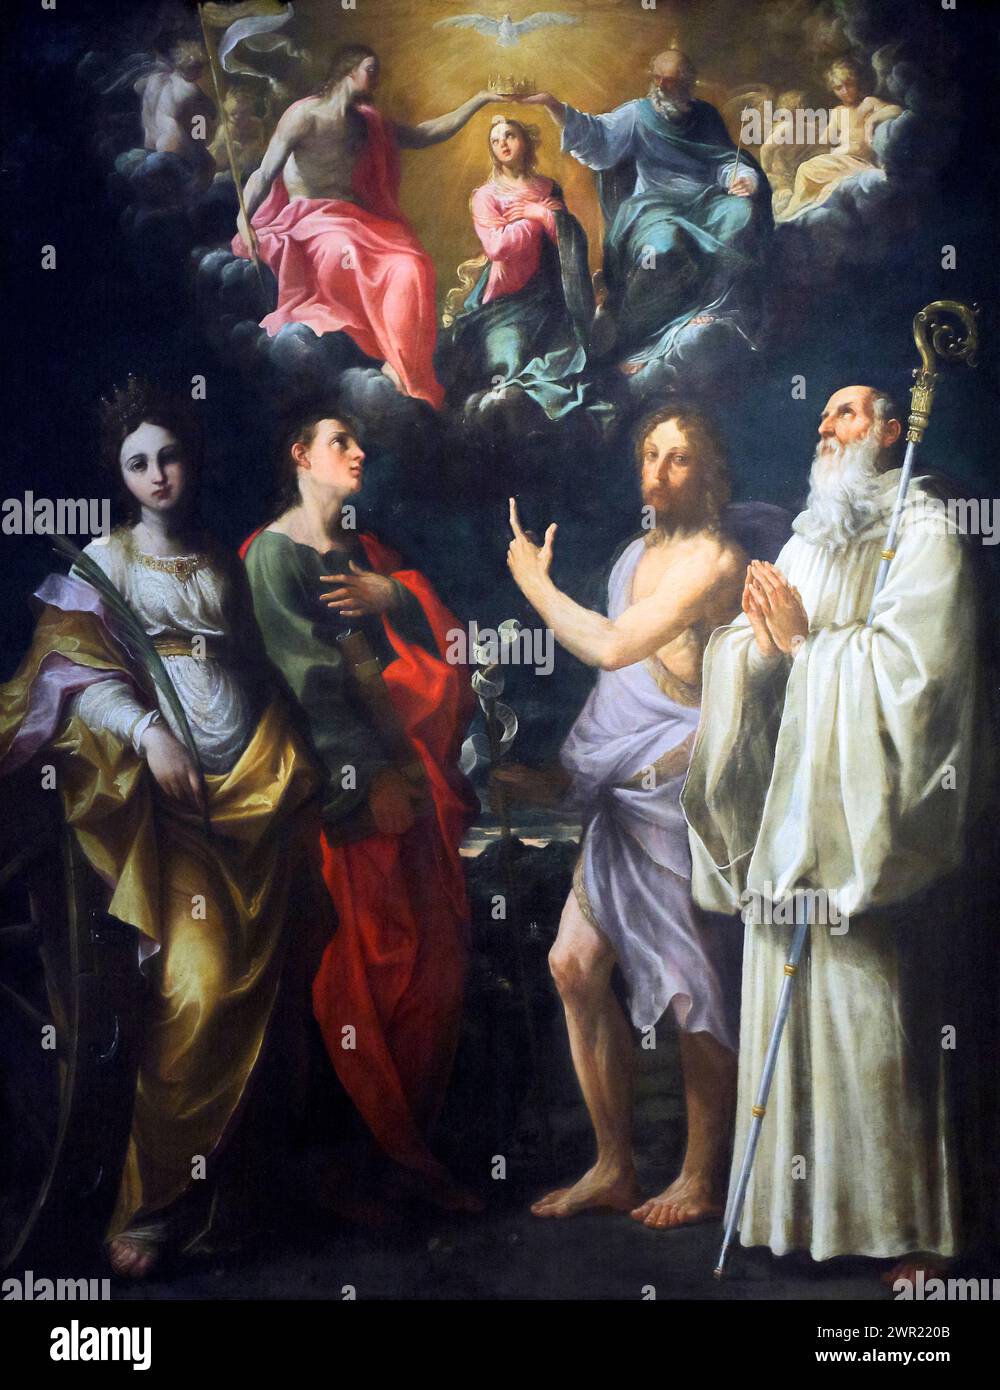 Italy Emilia Romagna Bologna - National art gallery - Coronation of the Virgin with Saints John the Evangelist, John the Baptist, Bernard and Catherine of Alexandria. by Guido Reni in 1610 Stock Photo